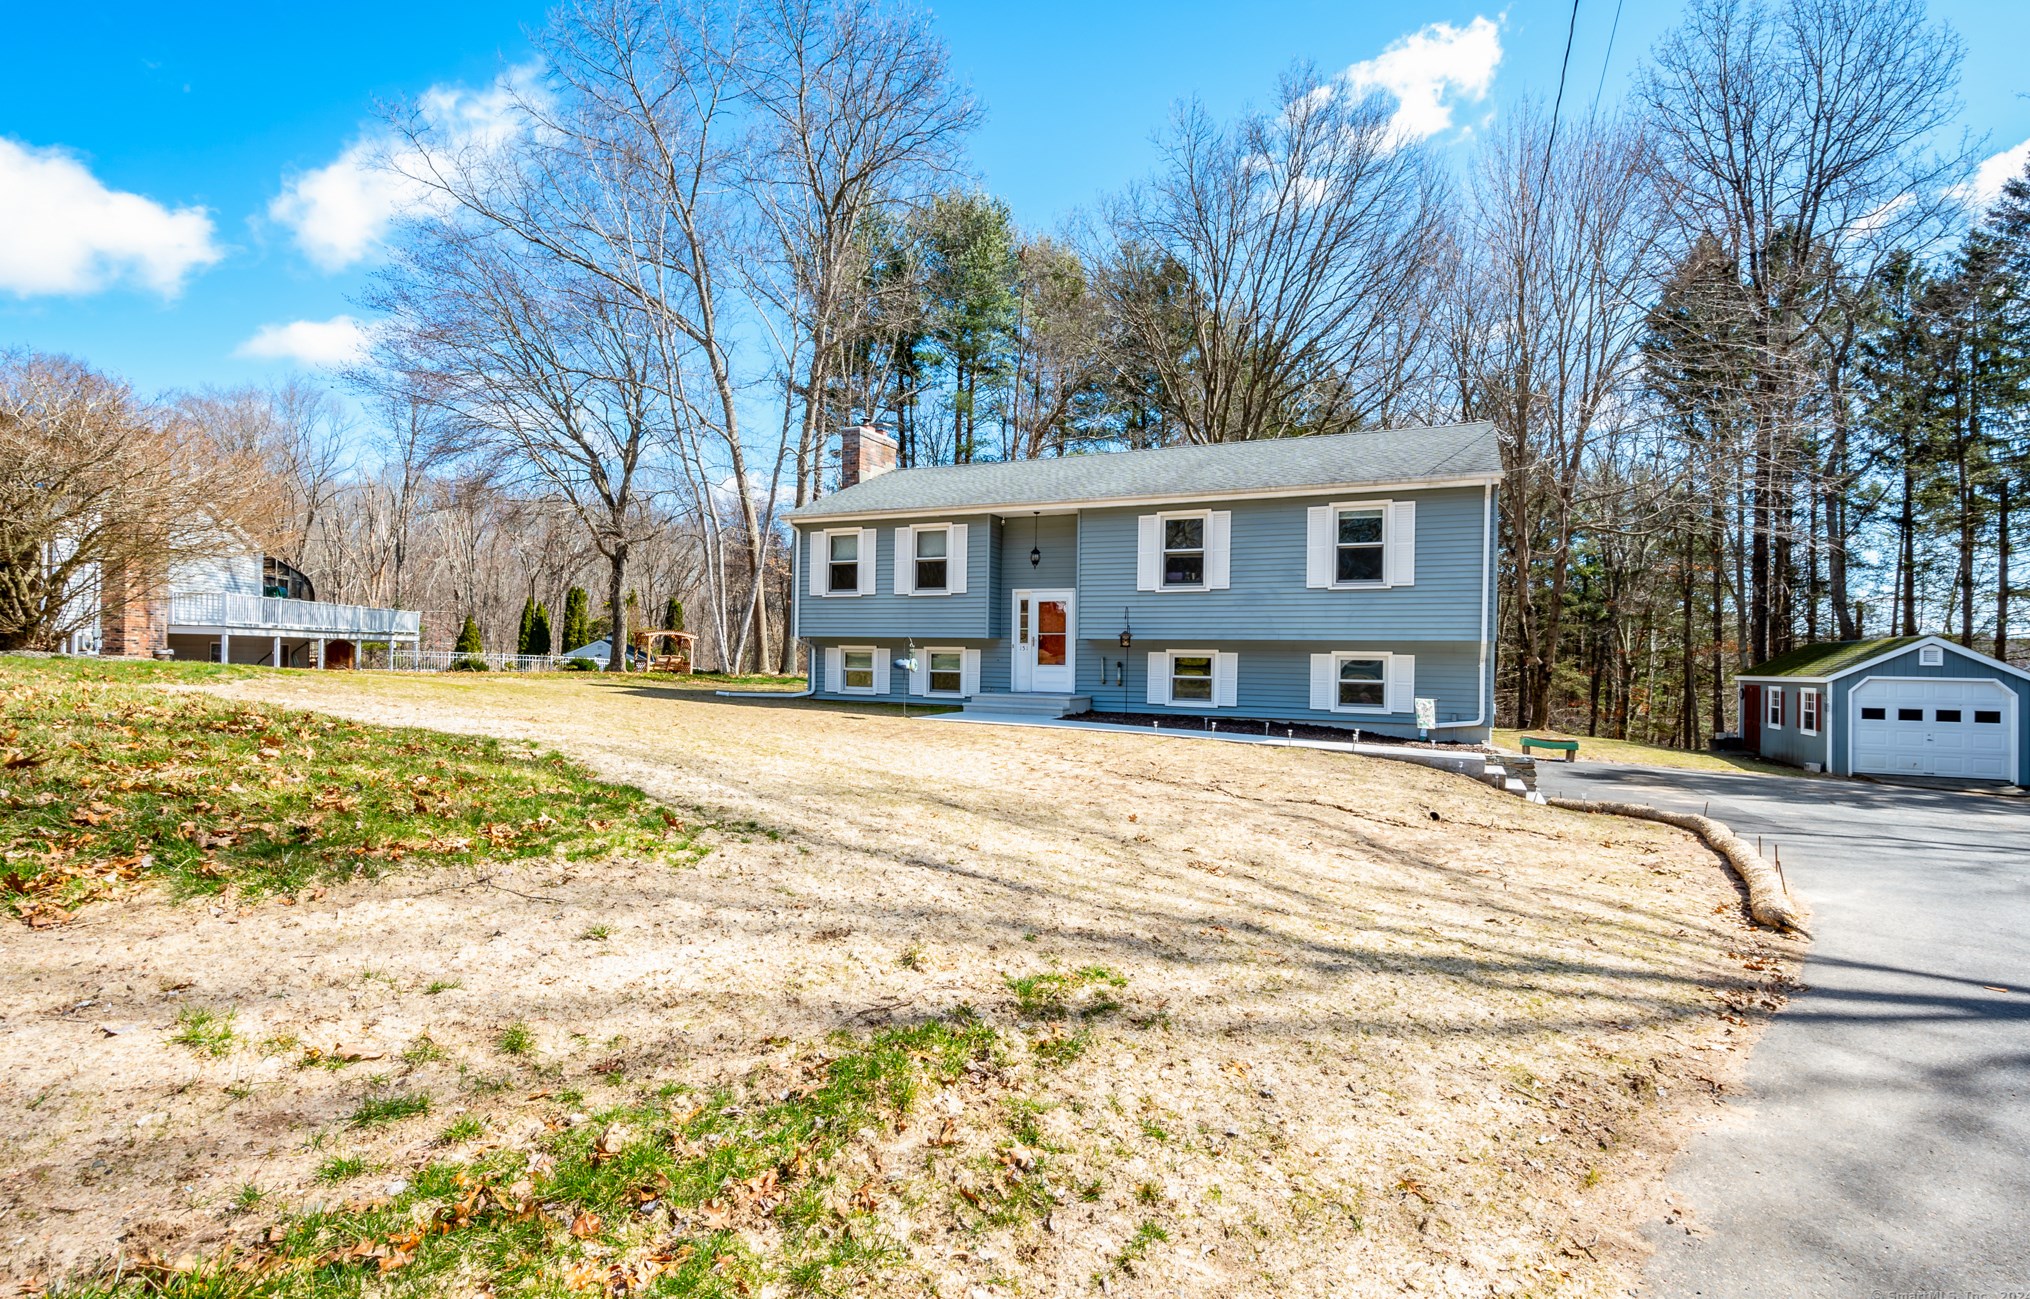 151 Barnsbee Ln, Coventry, CT 06238